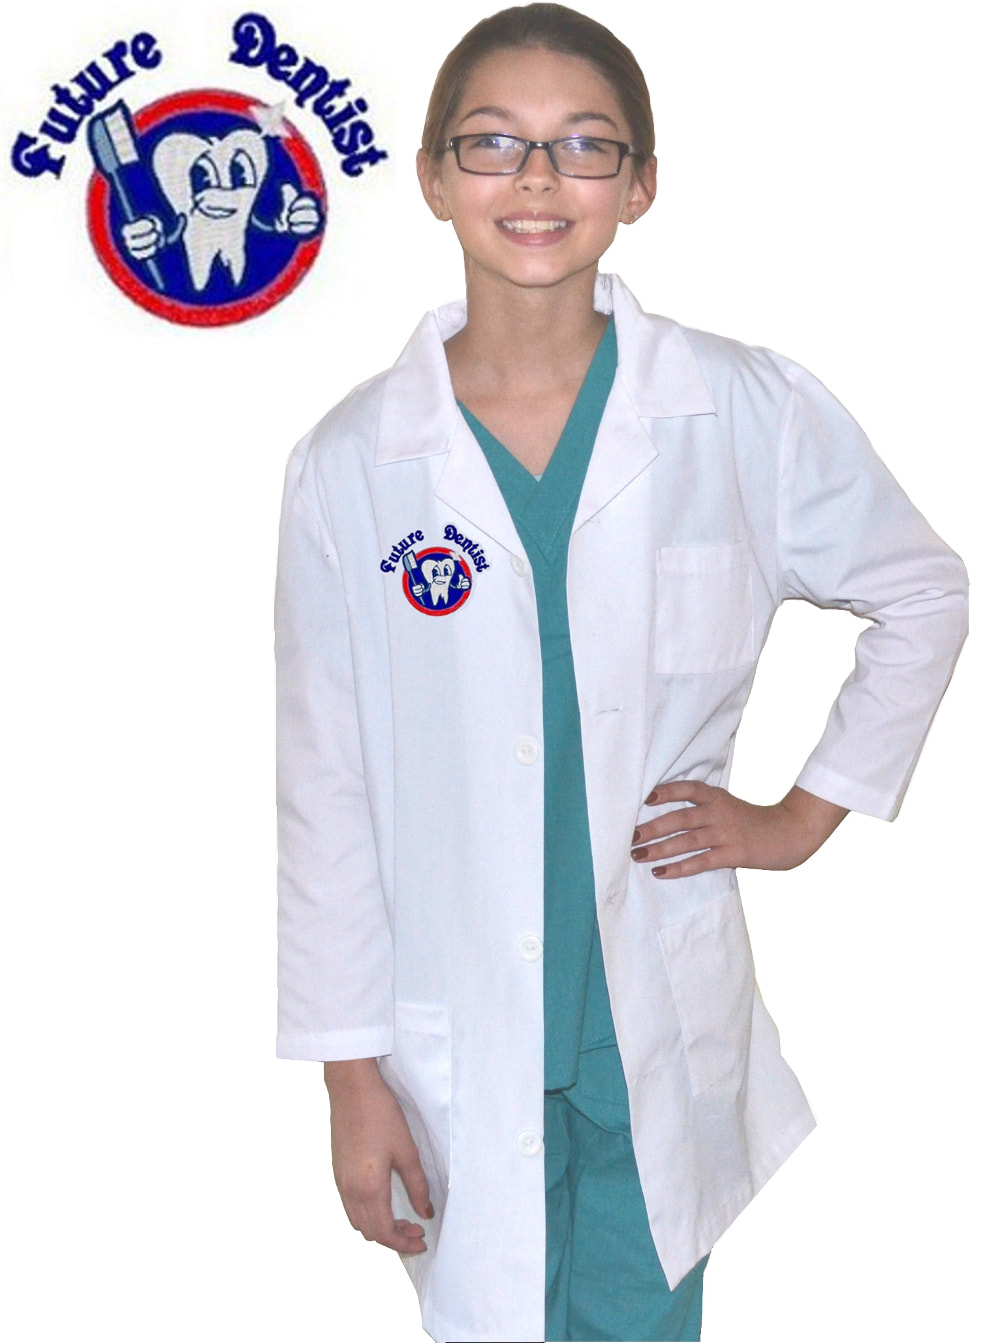 Kids Dentist Lab Coat with Future Dentist Embroidery Design